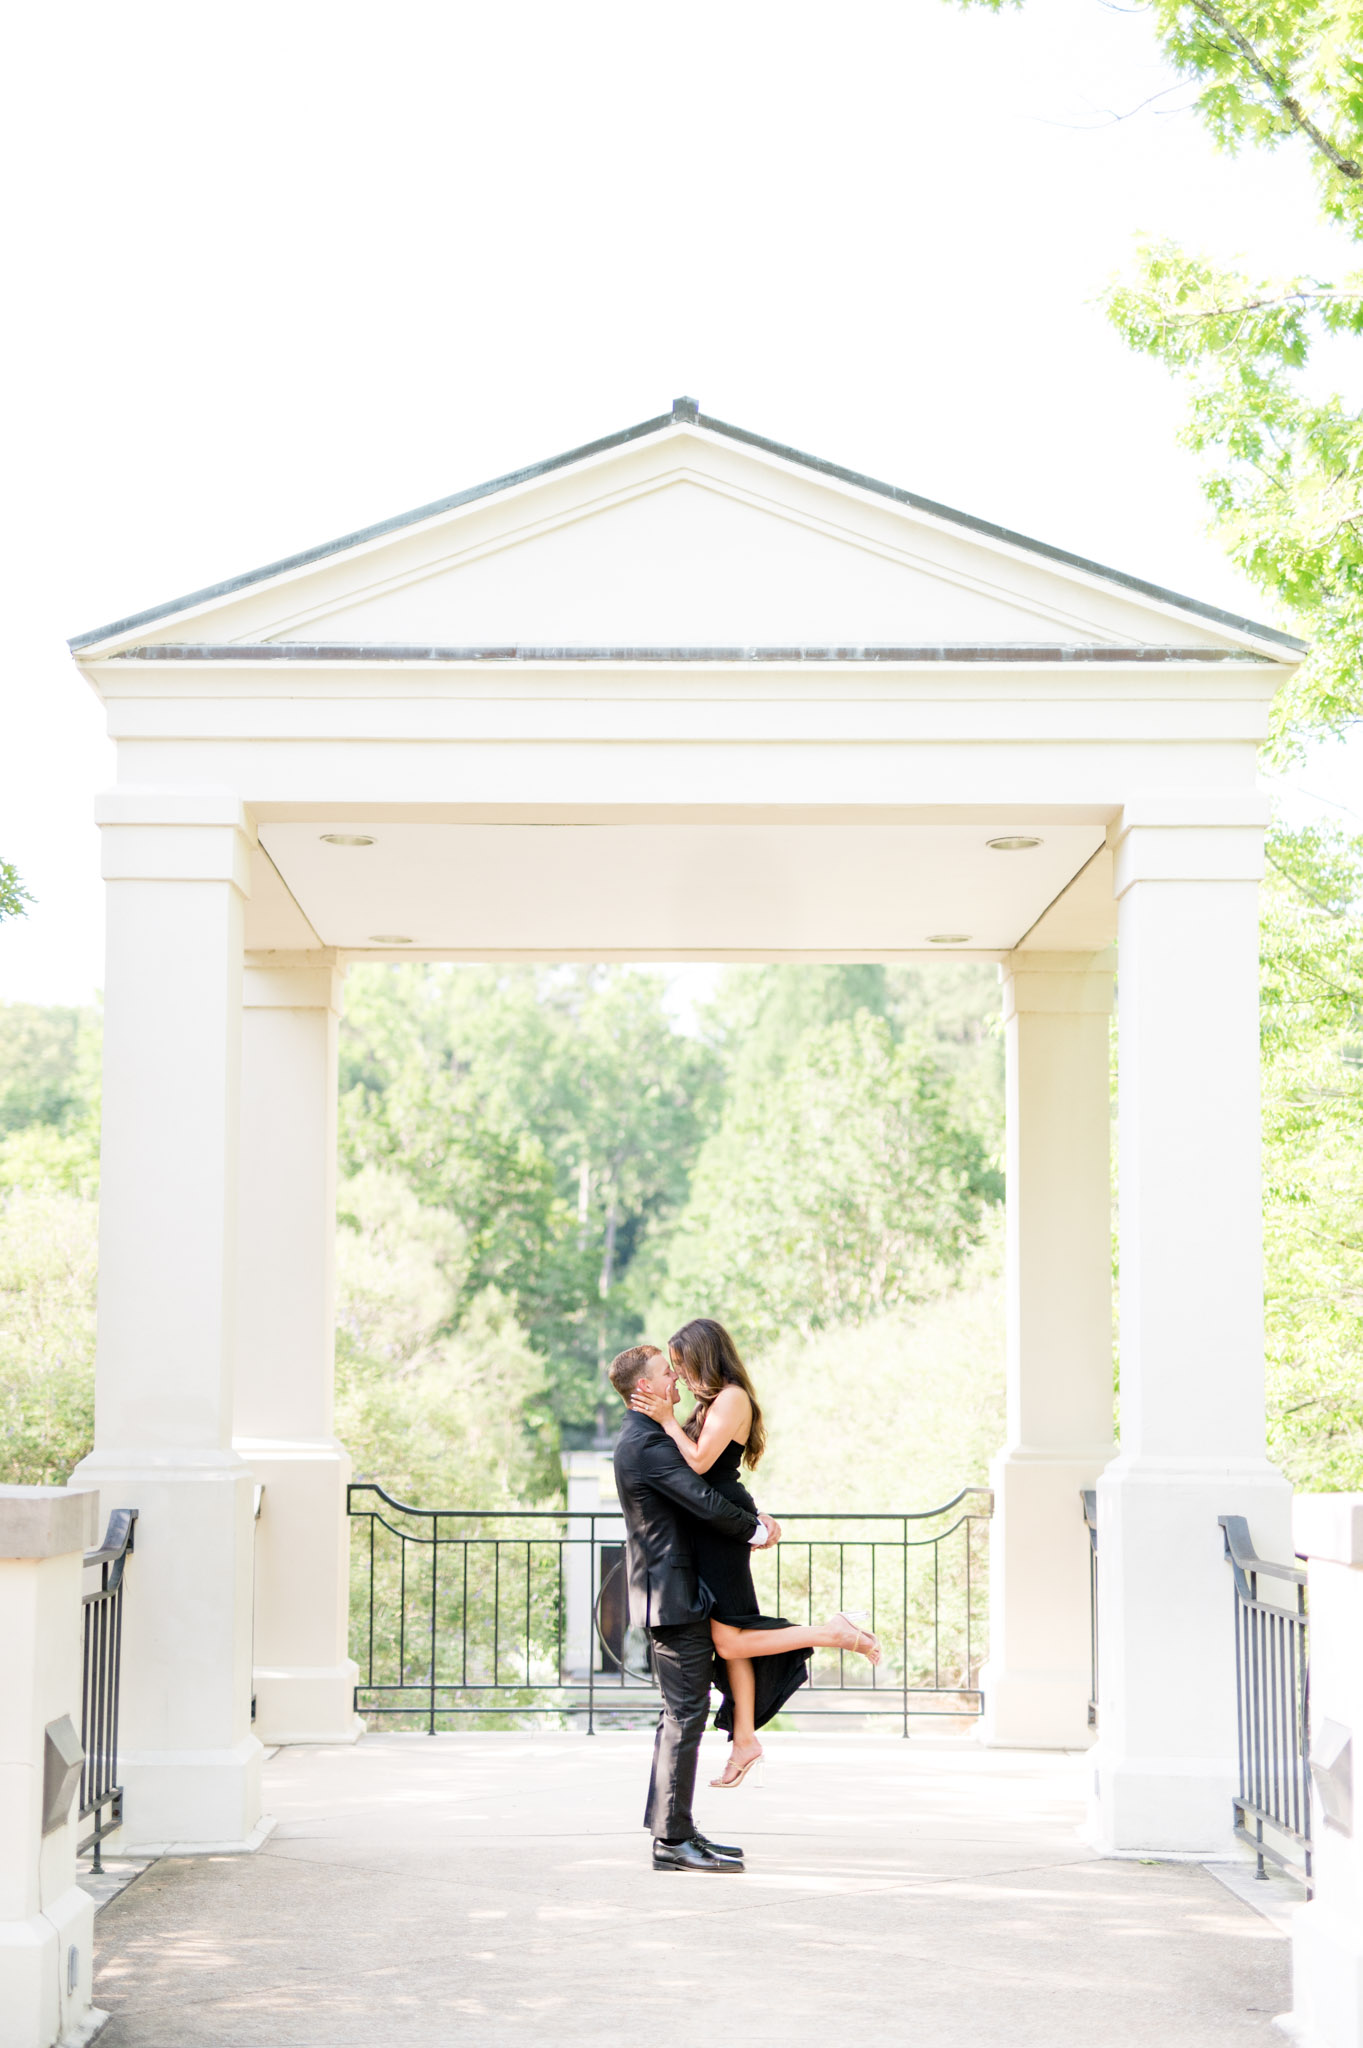 Groom lifts fiance up in front of white pavilion.